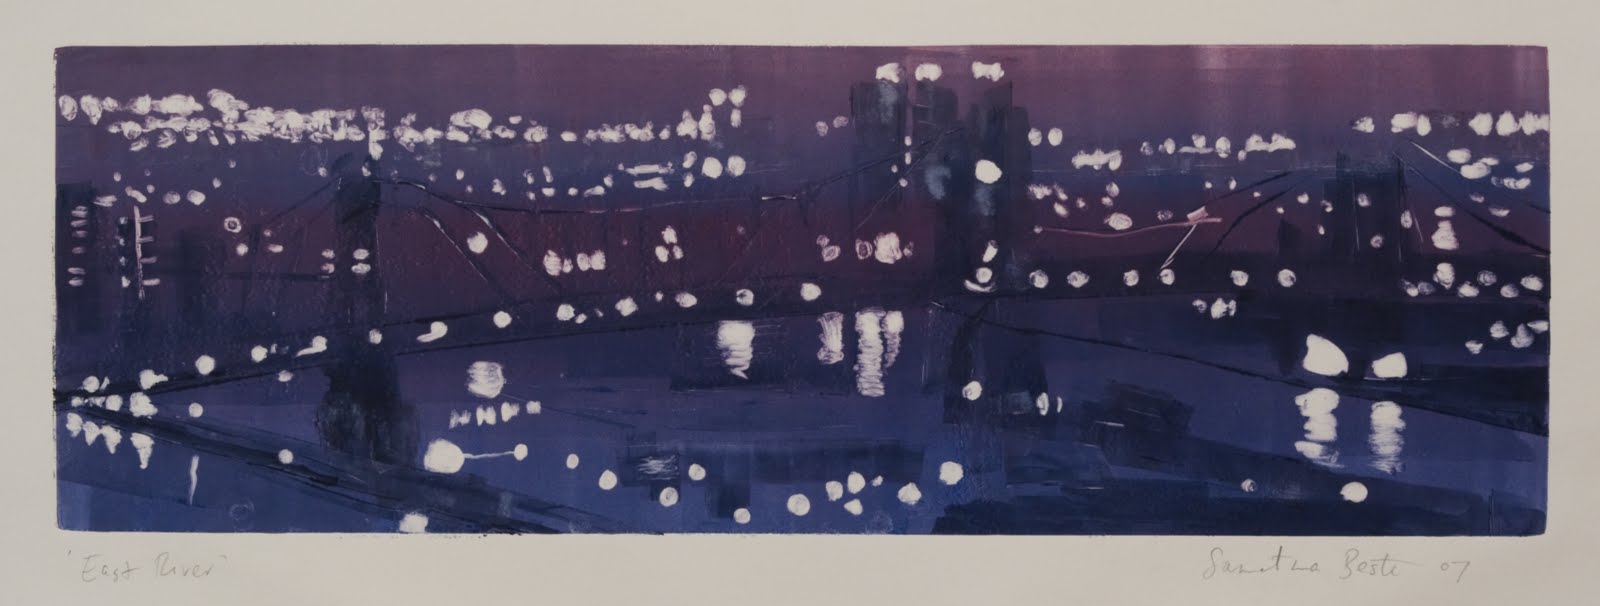 "East River", monotype, 6 x 18 in.